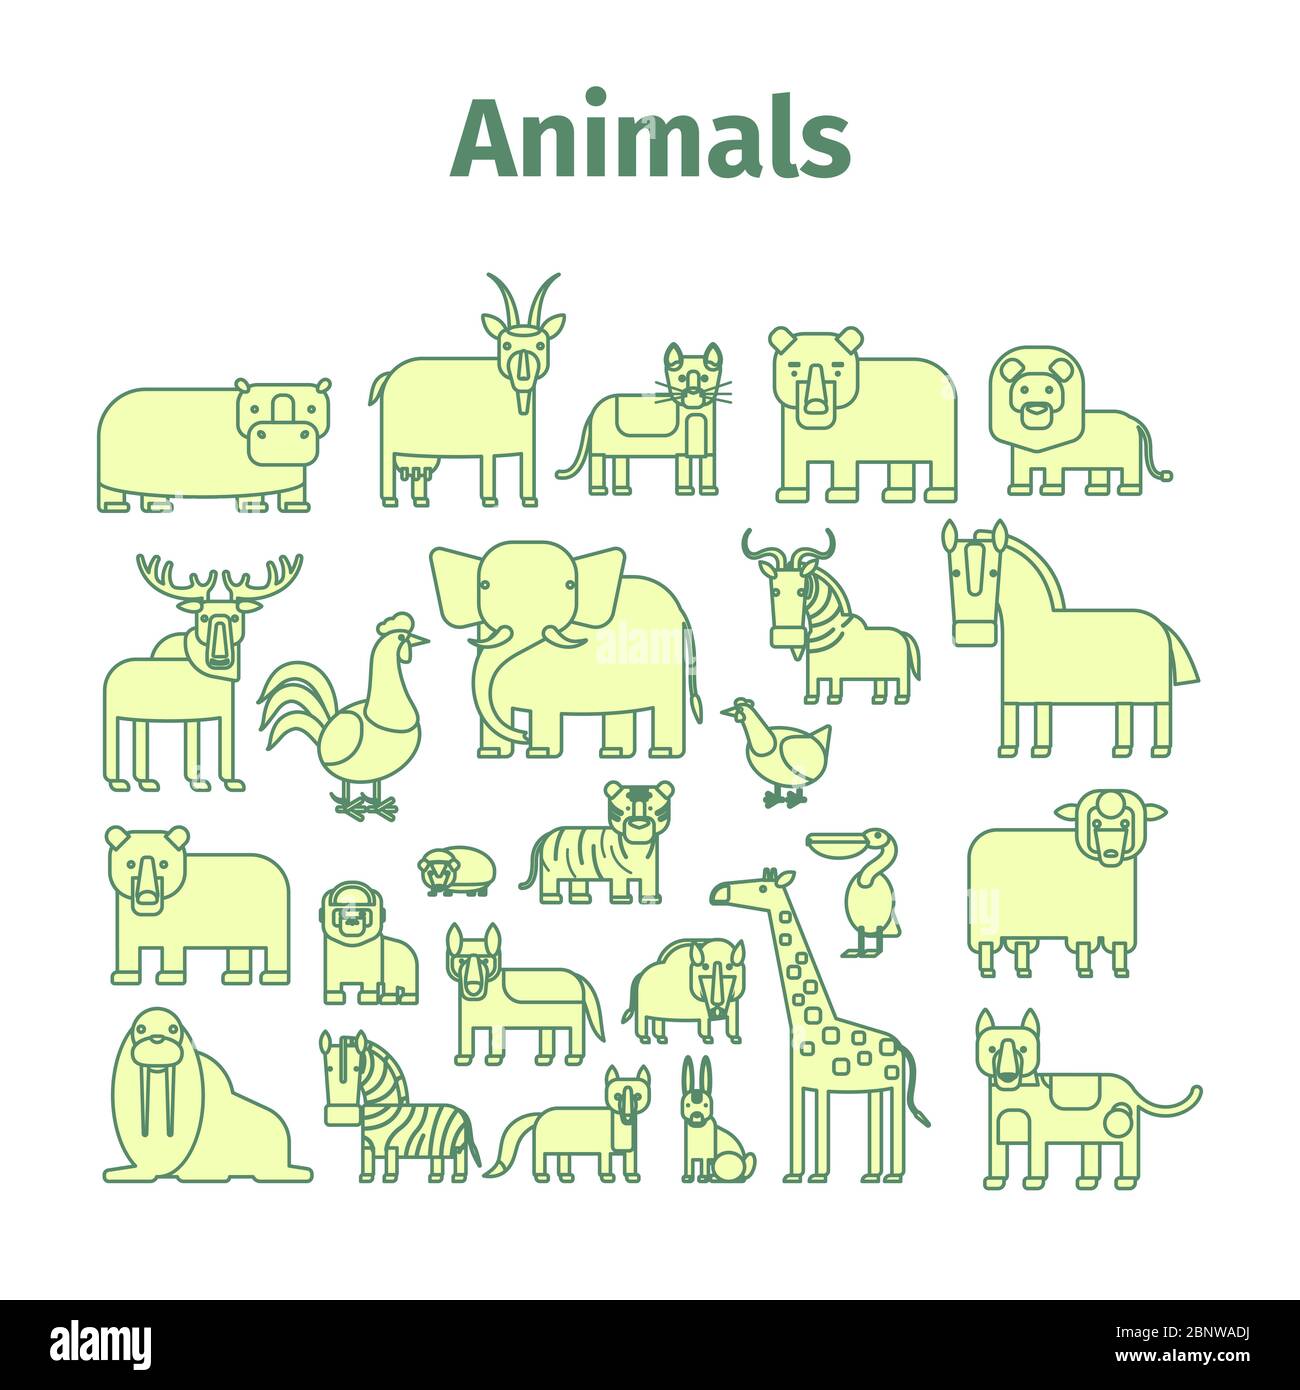 Animals line art vector Icons with strokes Stock Vector